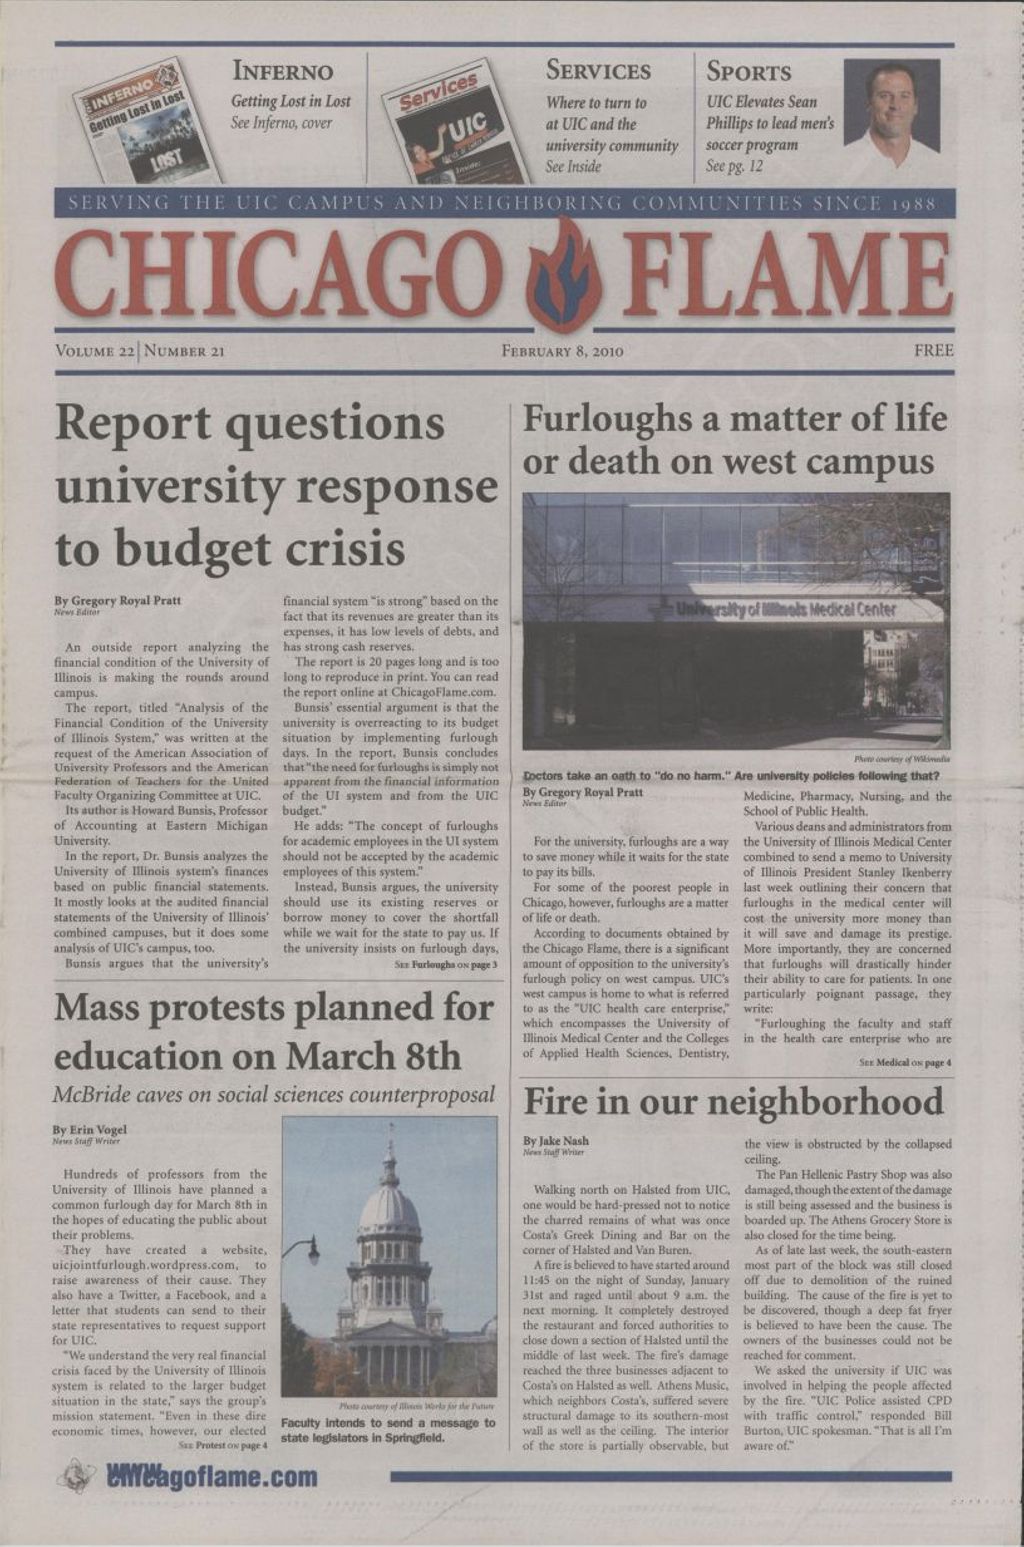 Chicago Flame (February 8, 2010)